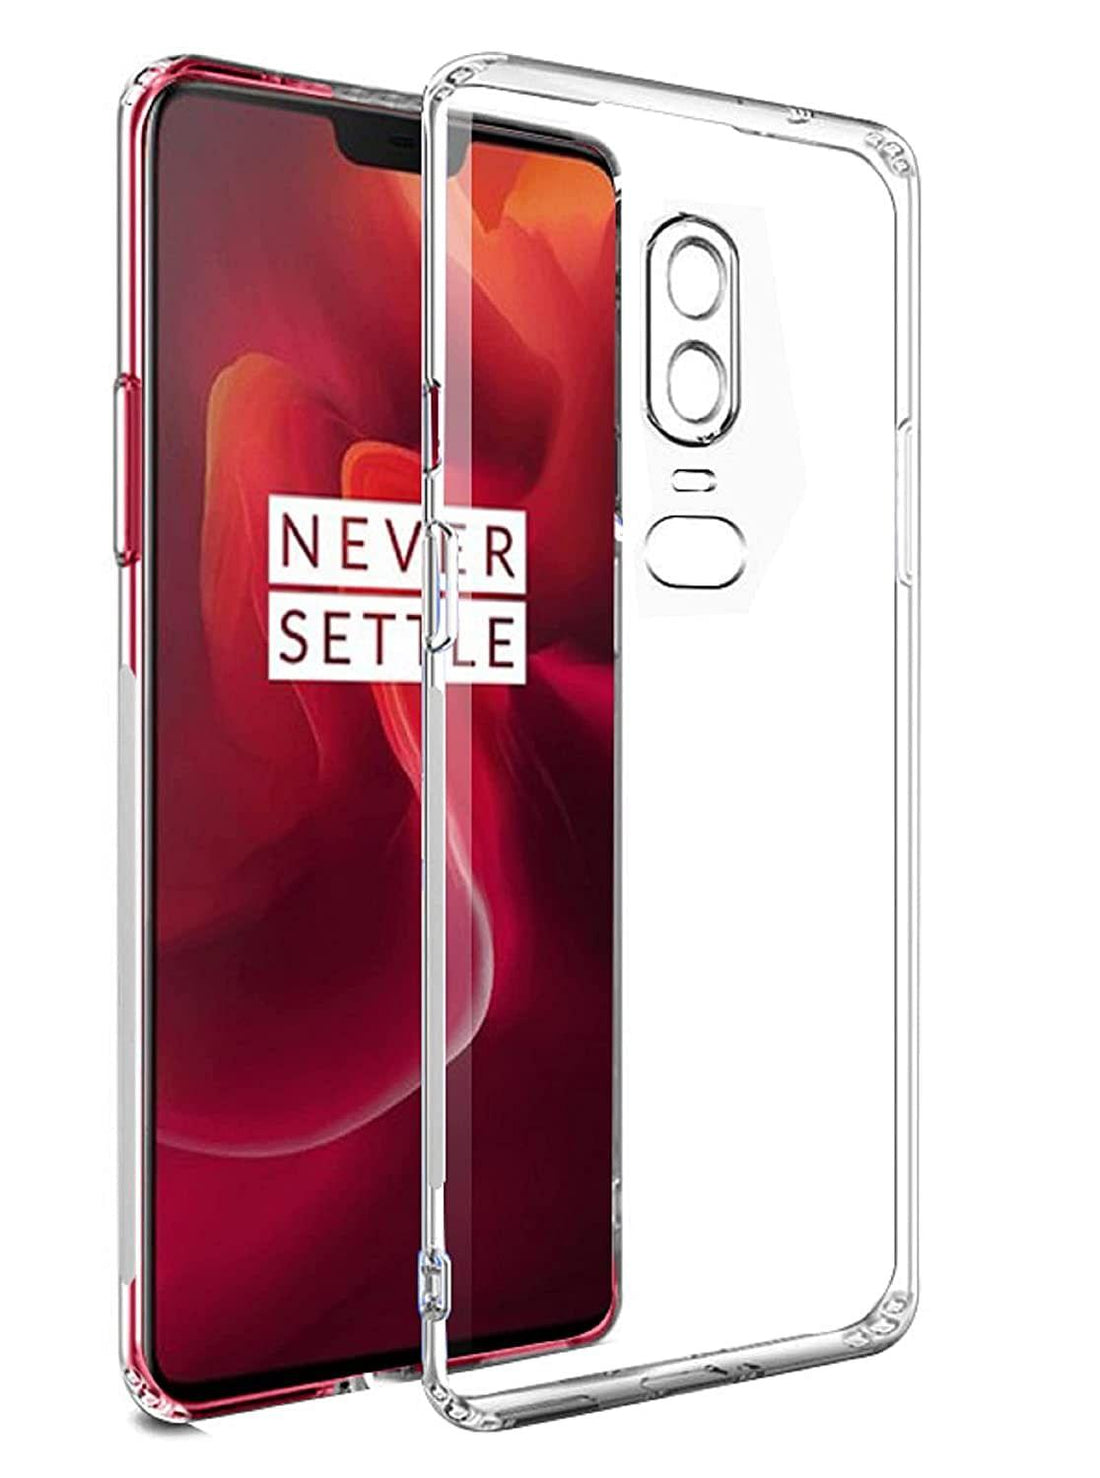 Oneplus 6 Back Cover Case Camera Protection Transparent